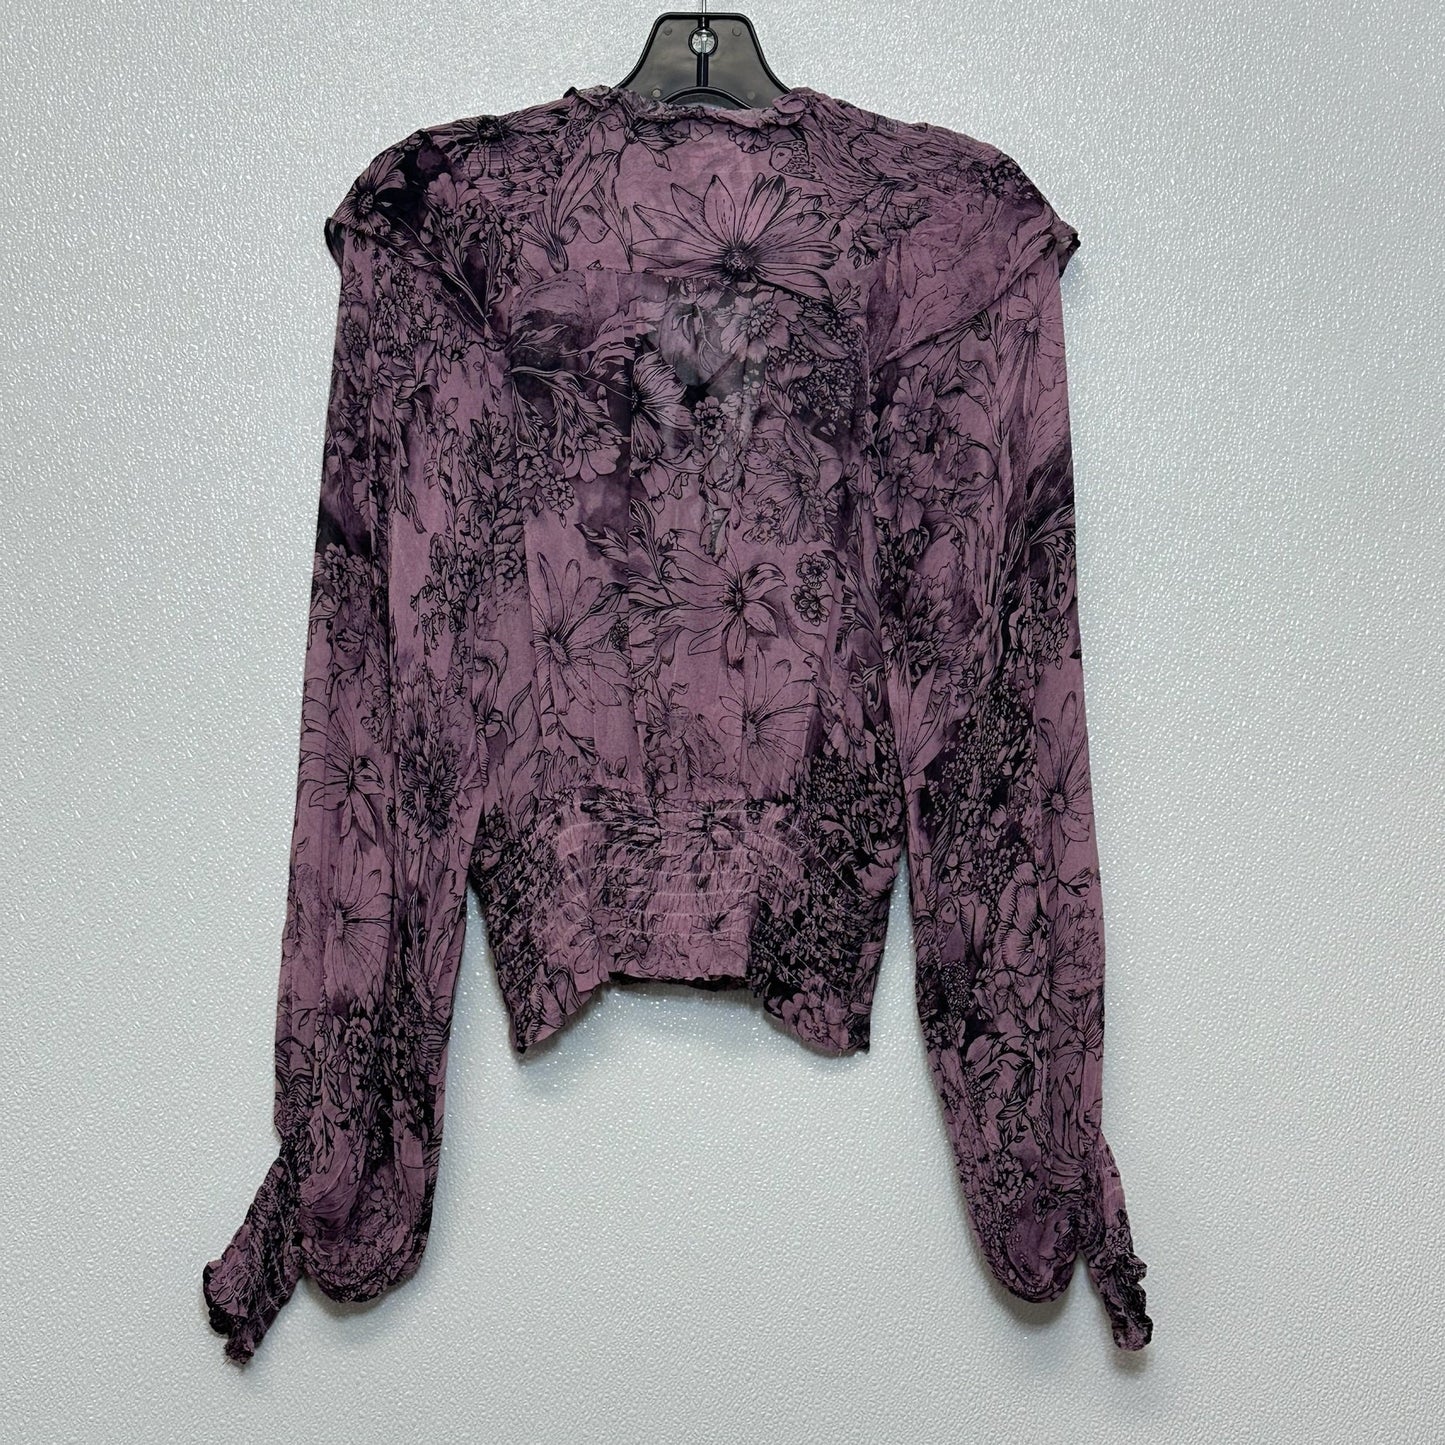 Top Long Sleeve By Anthropologie  Size: Xxs